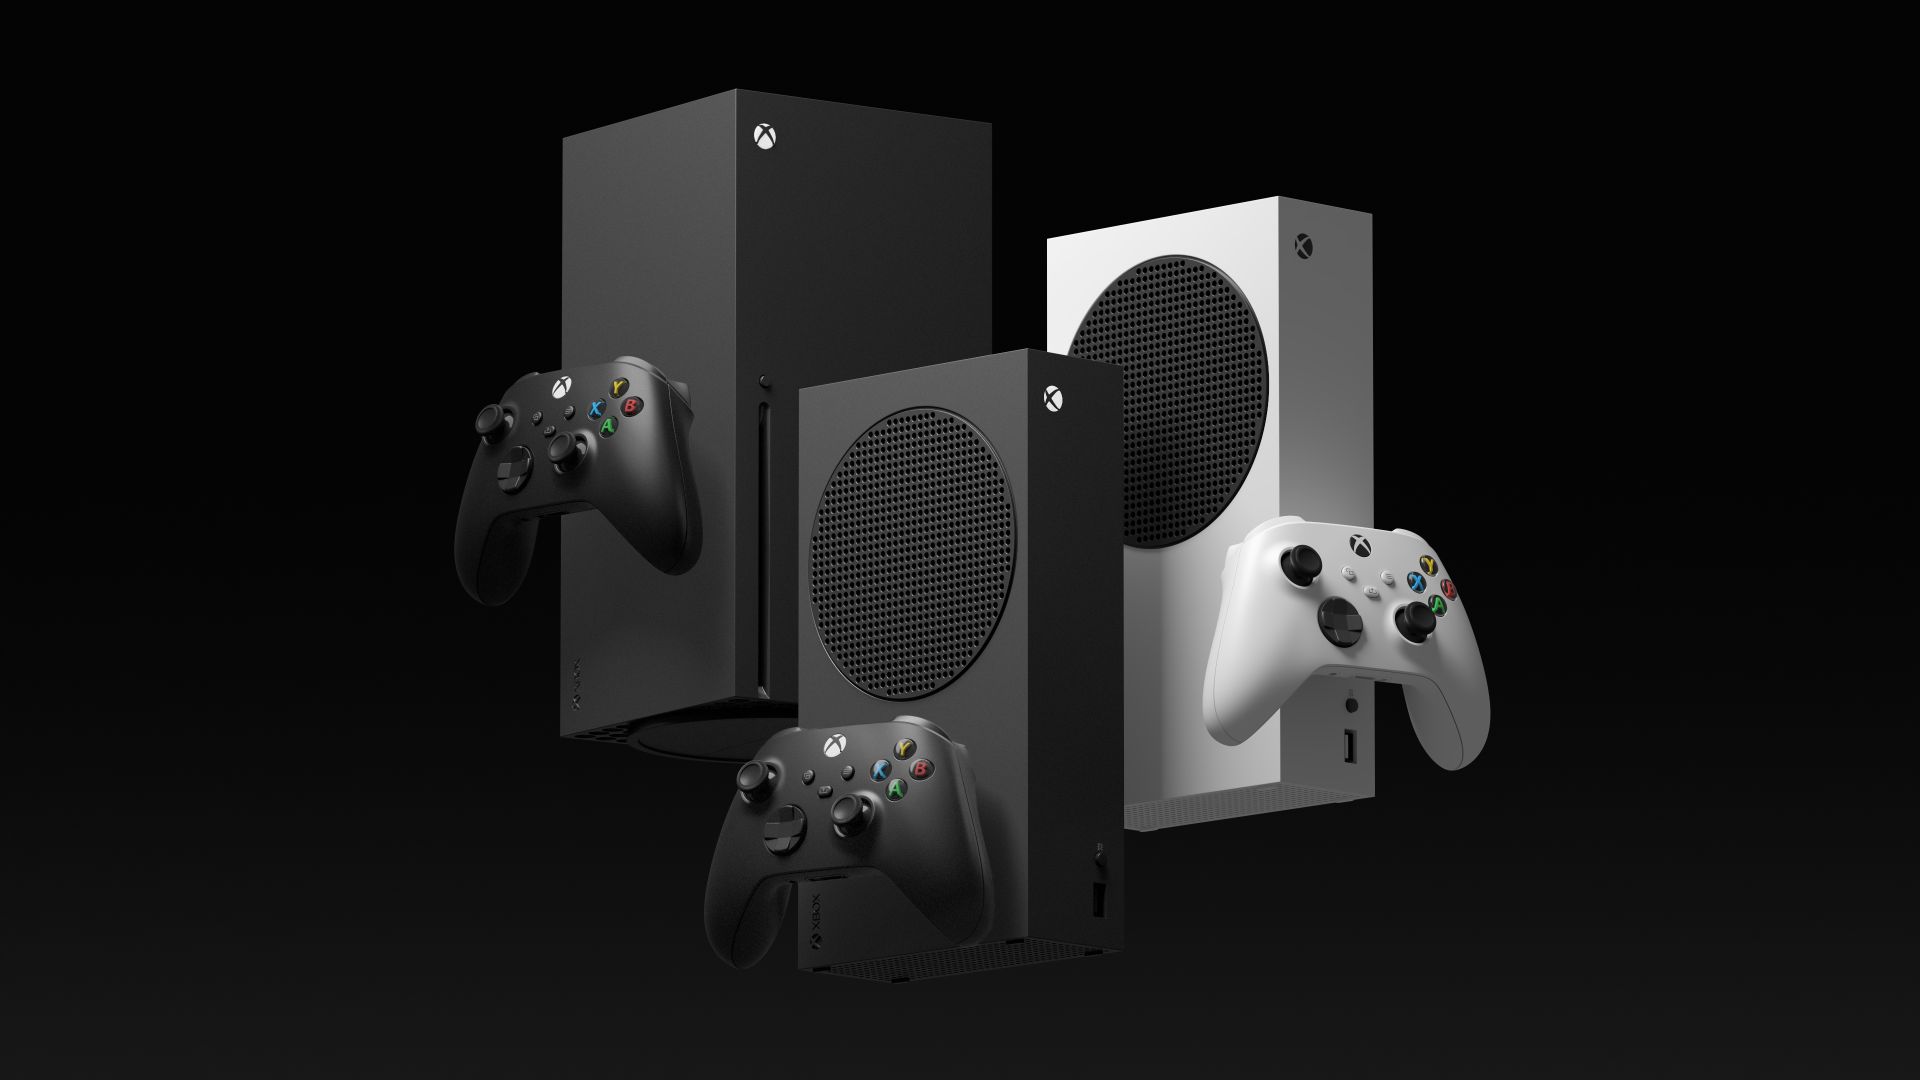 Xbox Series S 1TB black model announced, priced at Rs 38,990 in